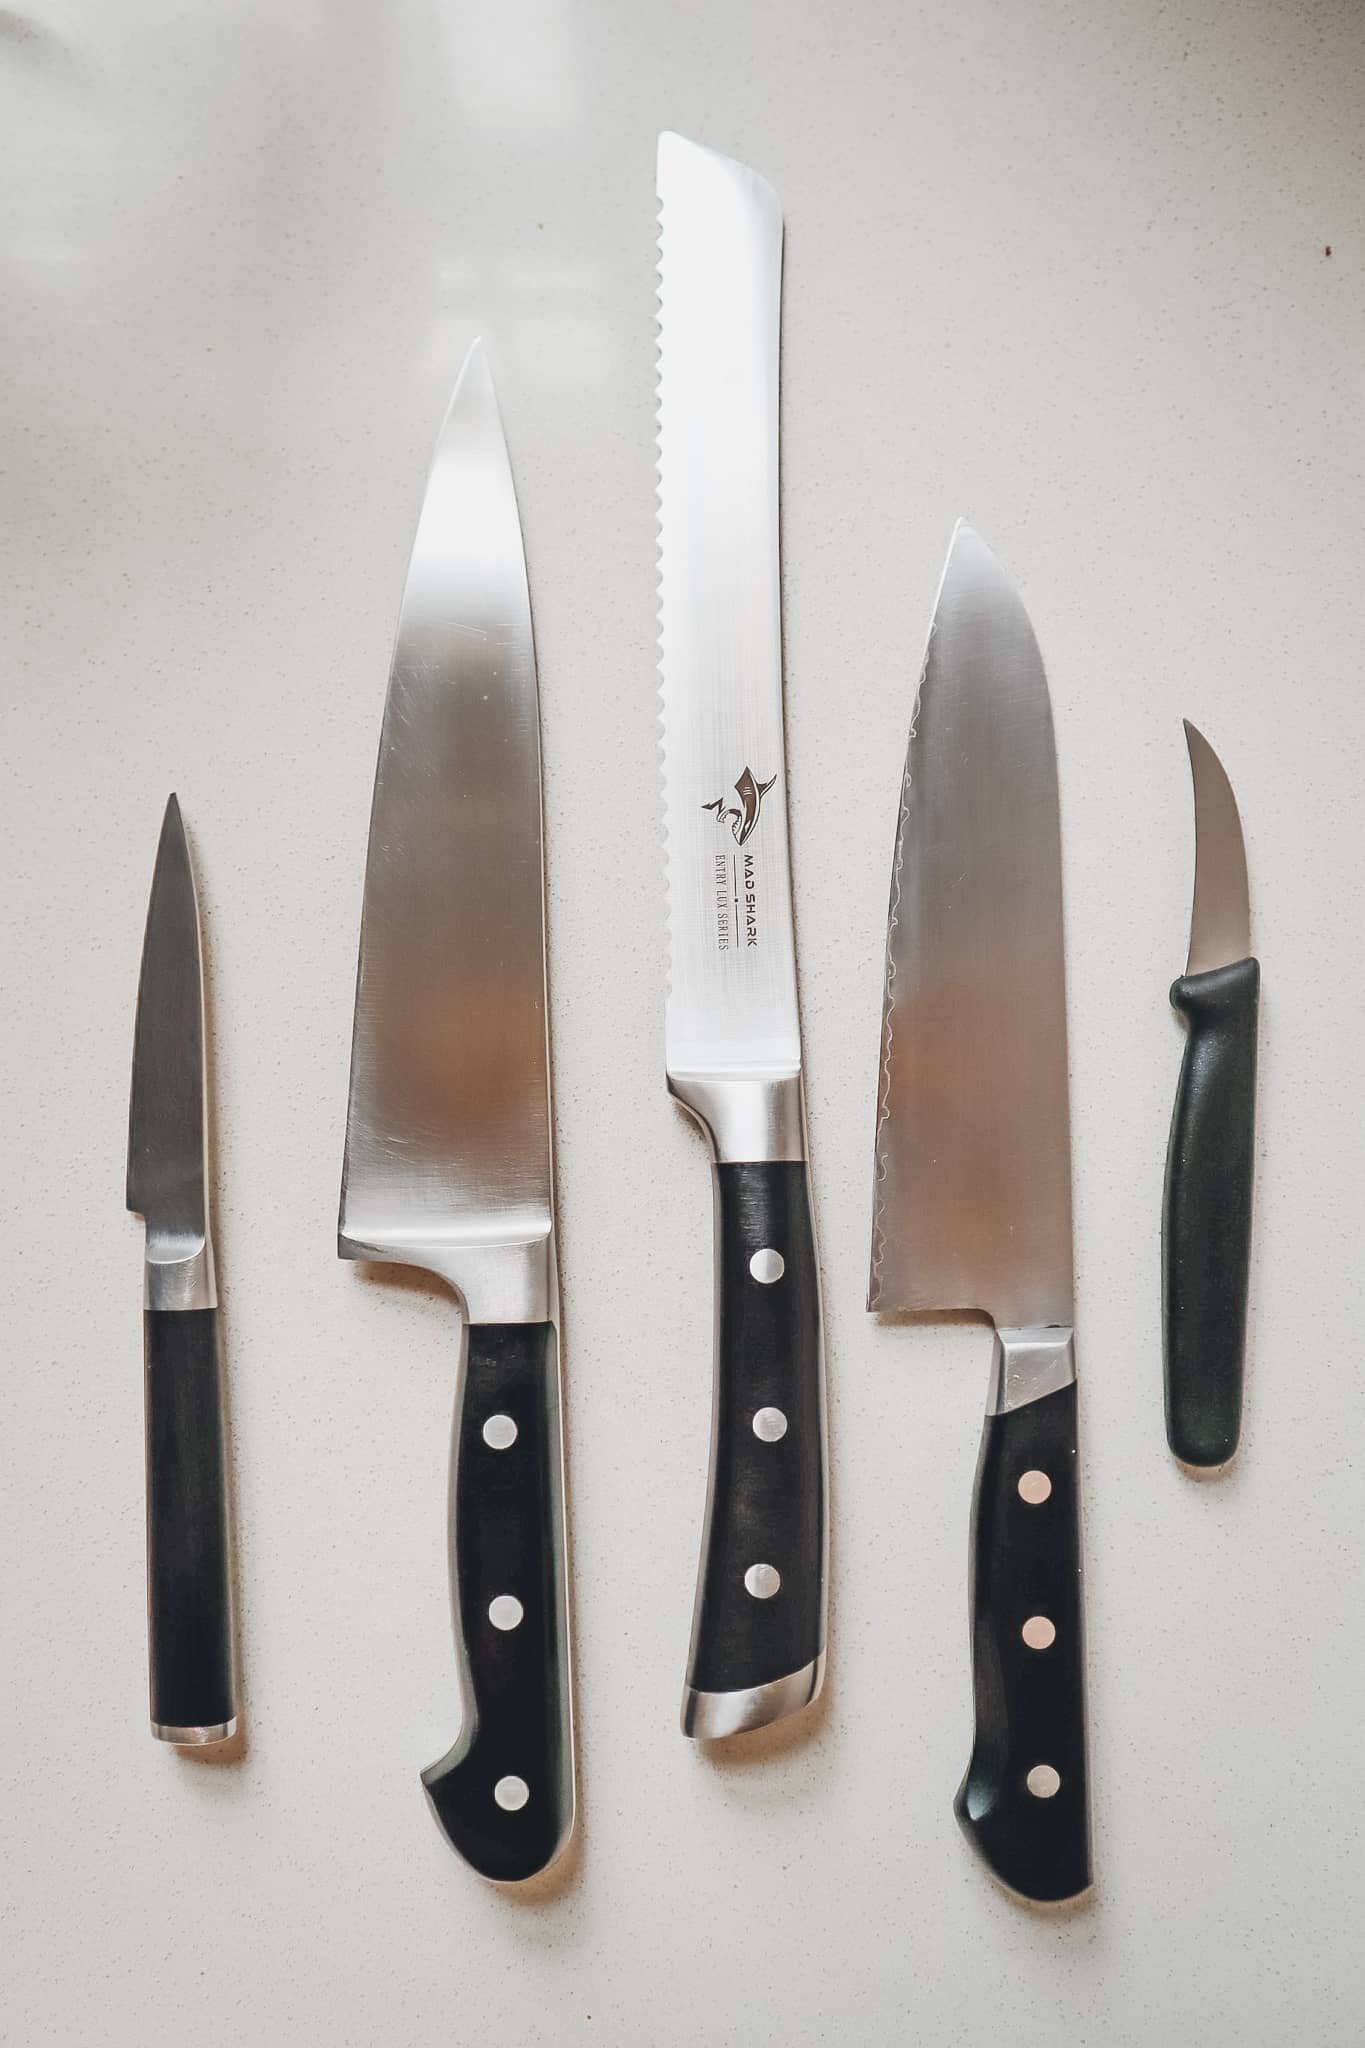 5 Tips for Sharpening Your Kitchen Knives Using a Sharpening Stone